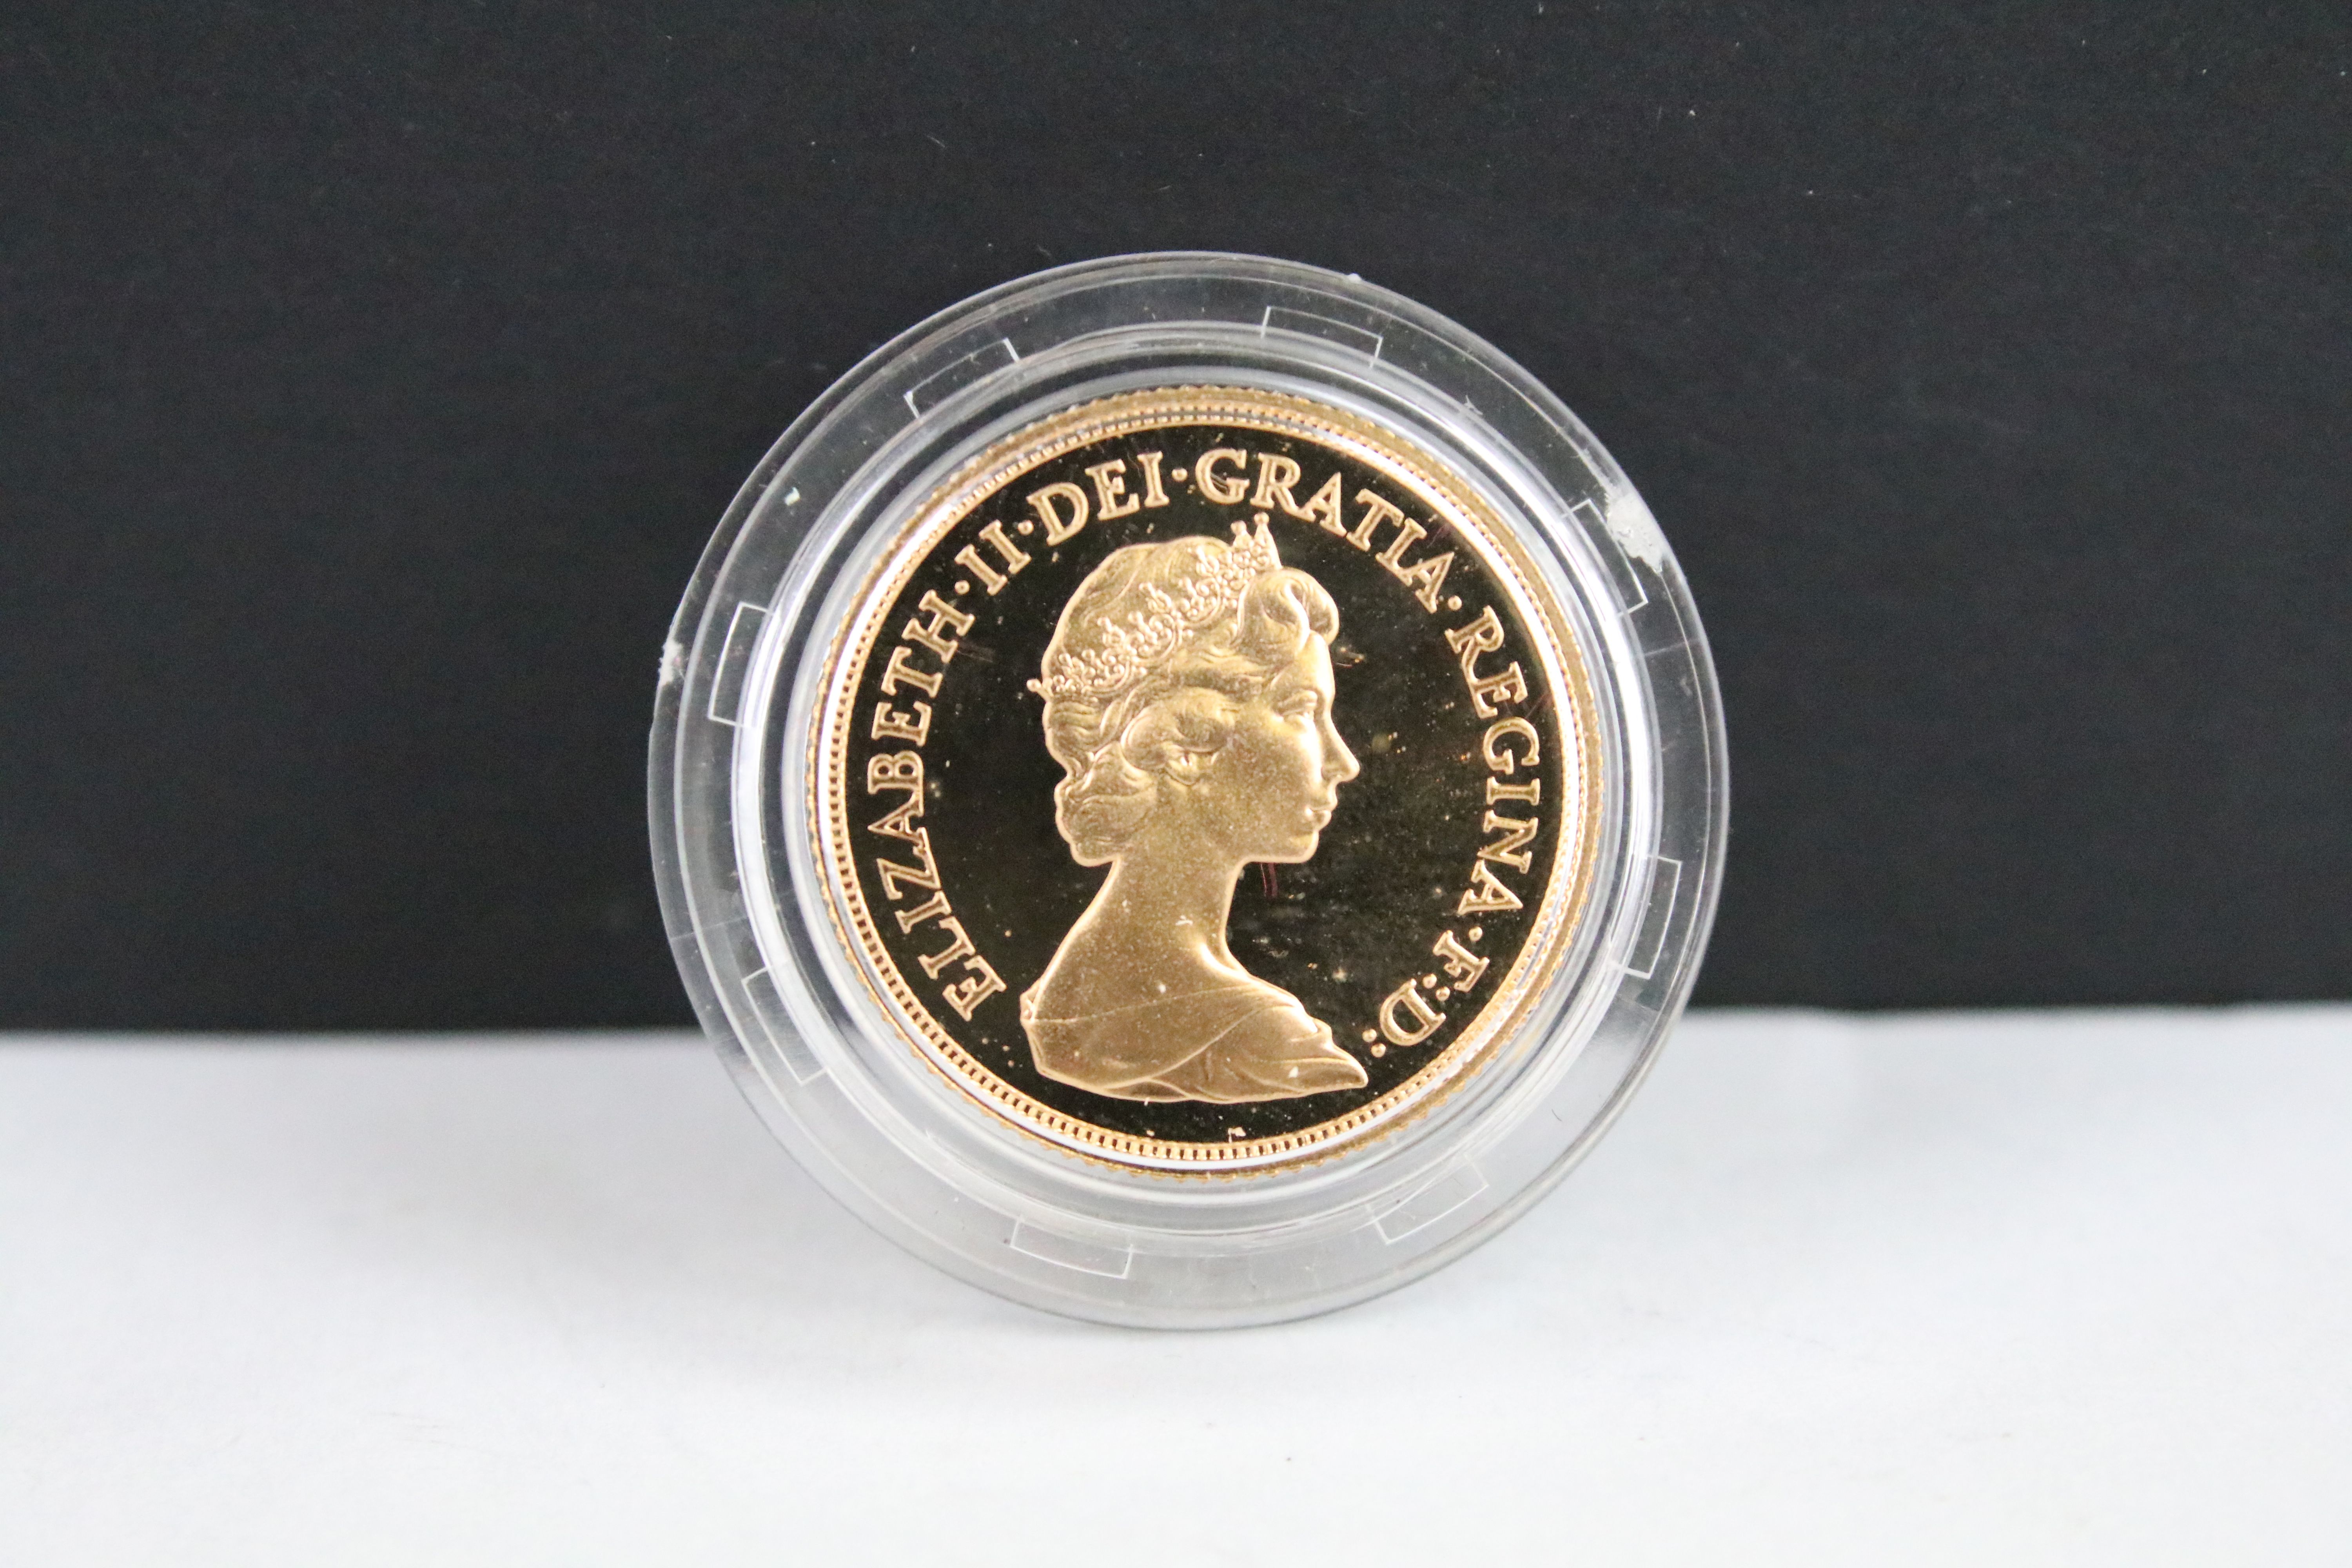 A British Royal Mint Queen Elizabeth II proof 1984 gold full sovereign coin encapsulated within - Image 3 of 4